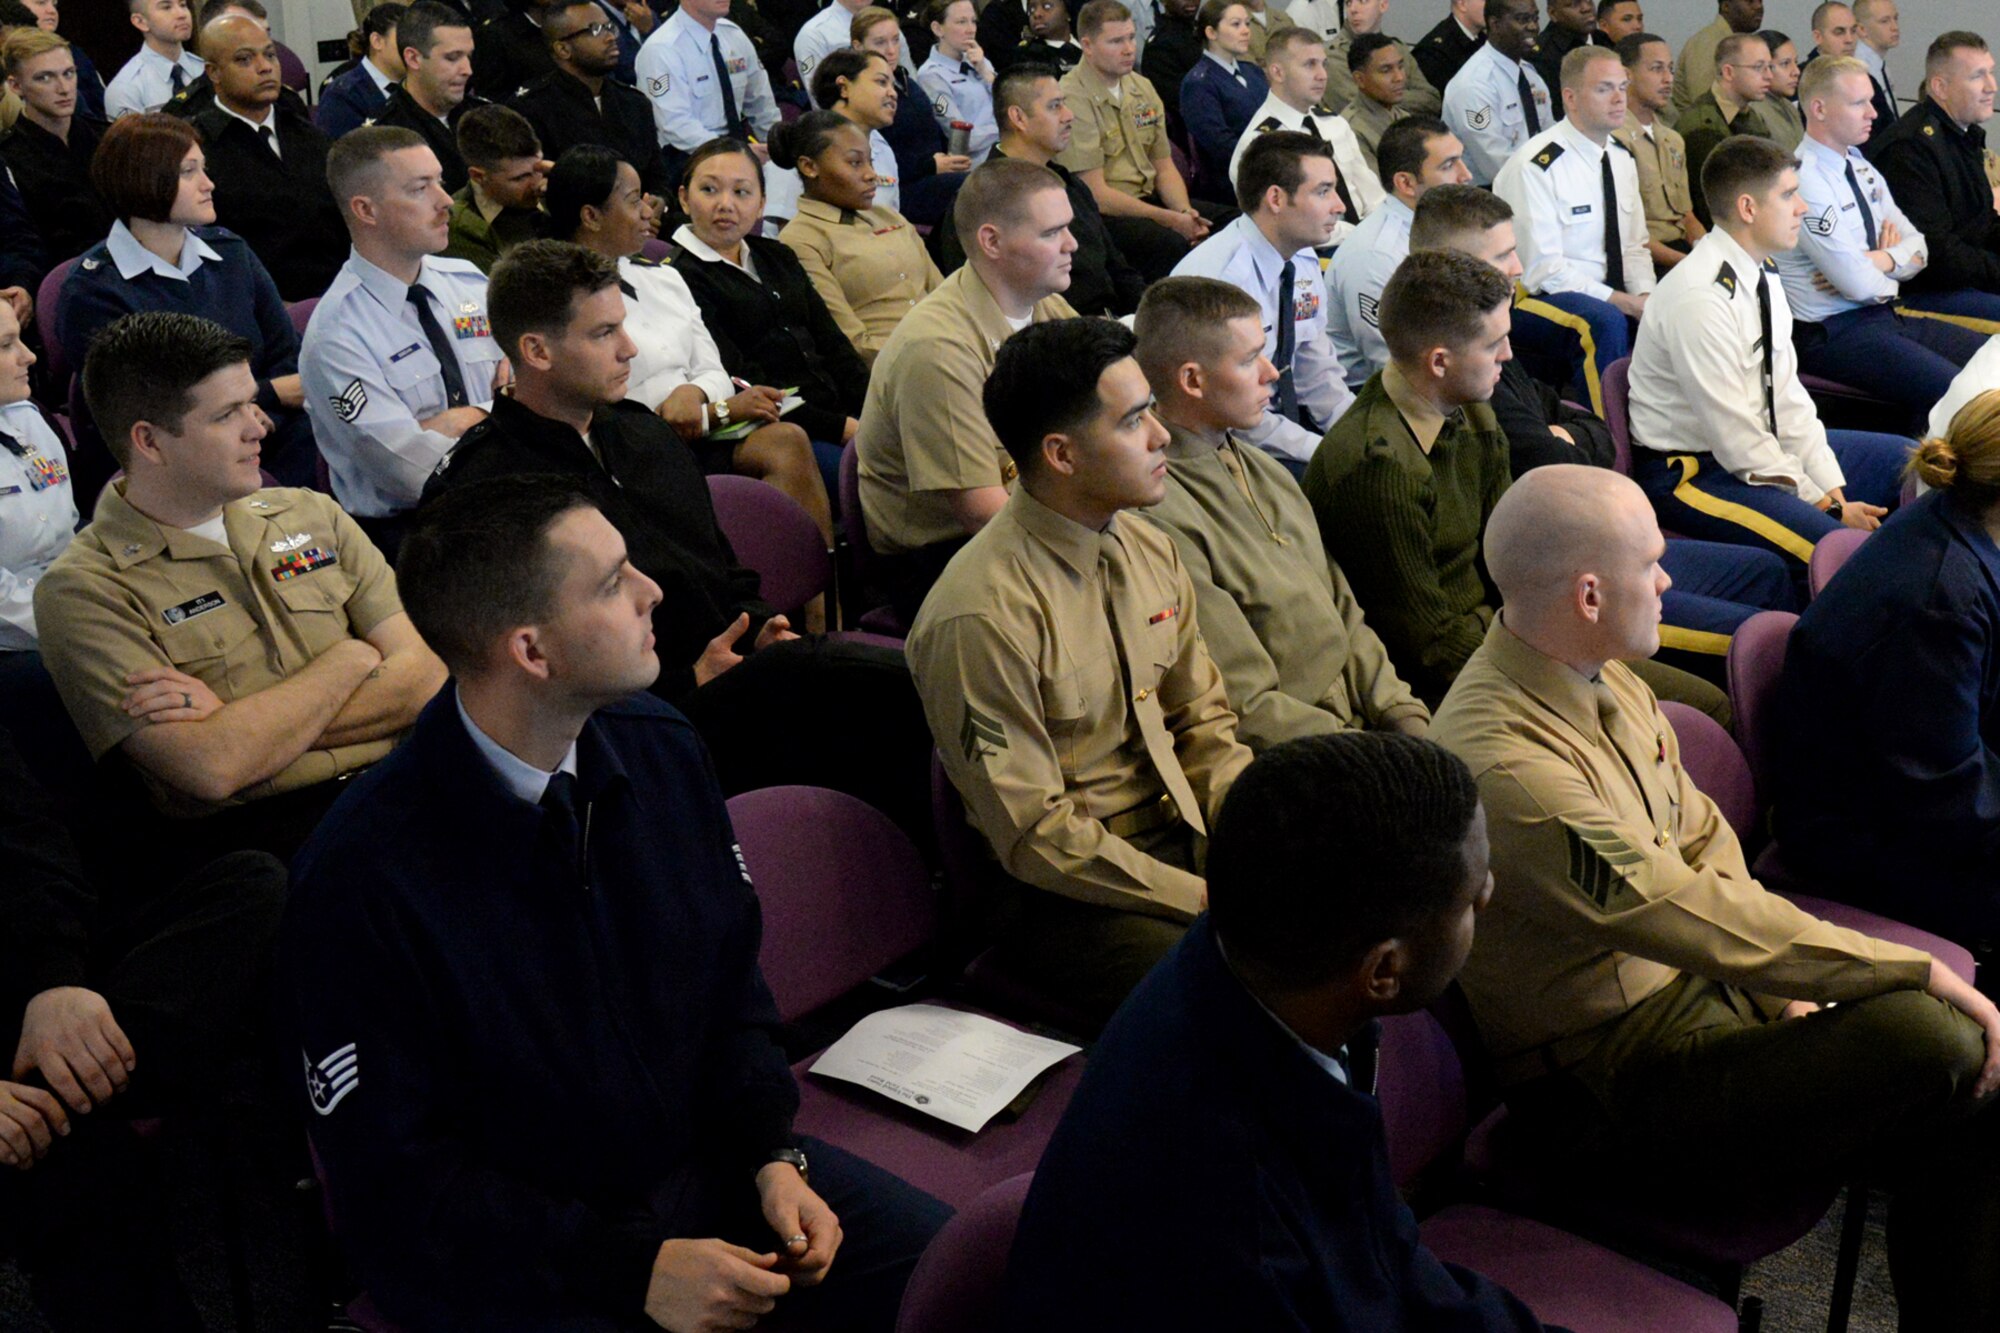 Service members from all branches attend the National Capital Region Joint Professional Development Seminar in Washington D.C. on Nov. 30, 2016. The seminar was held at the National Defense University on Ft. McNair and helps NCOs develop skills to prepare them for challenges they may face filling joint mission requirements. (U.S. Air Force photo/Tech. Sgt. Matt Davis)